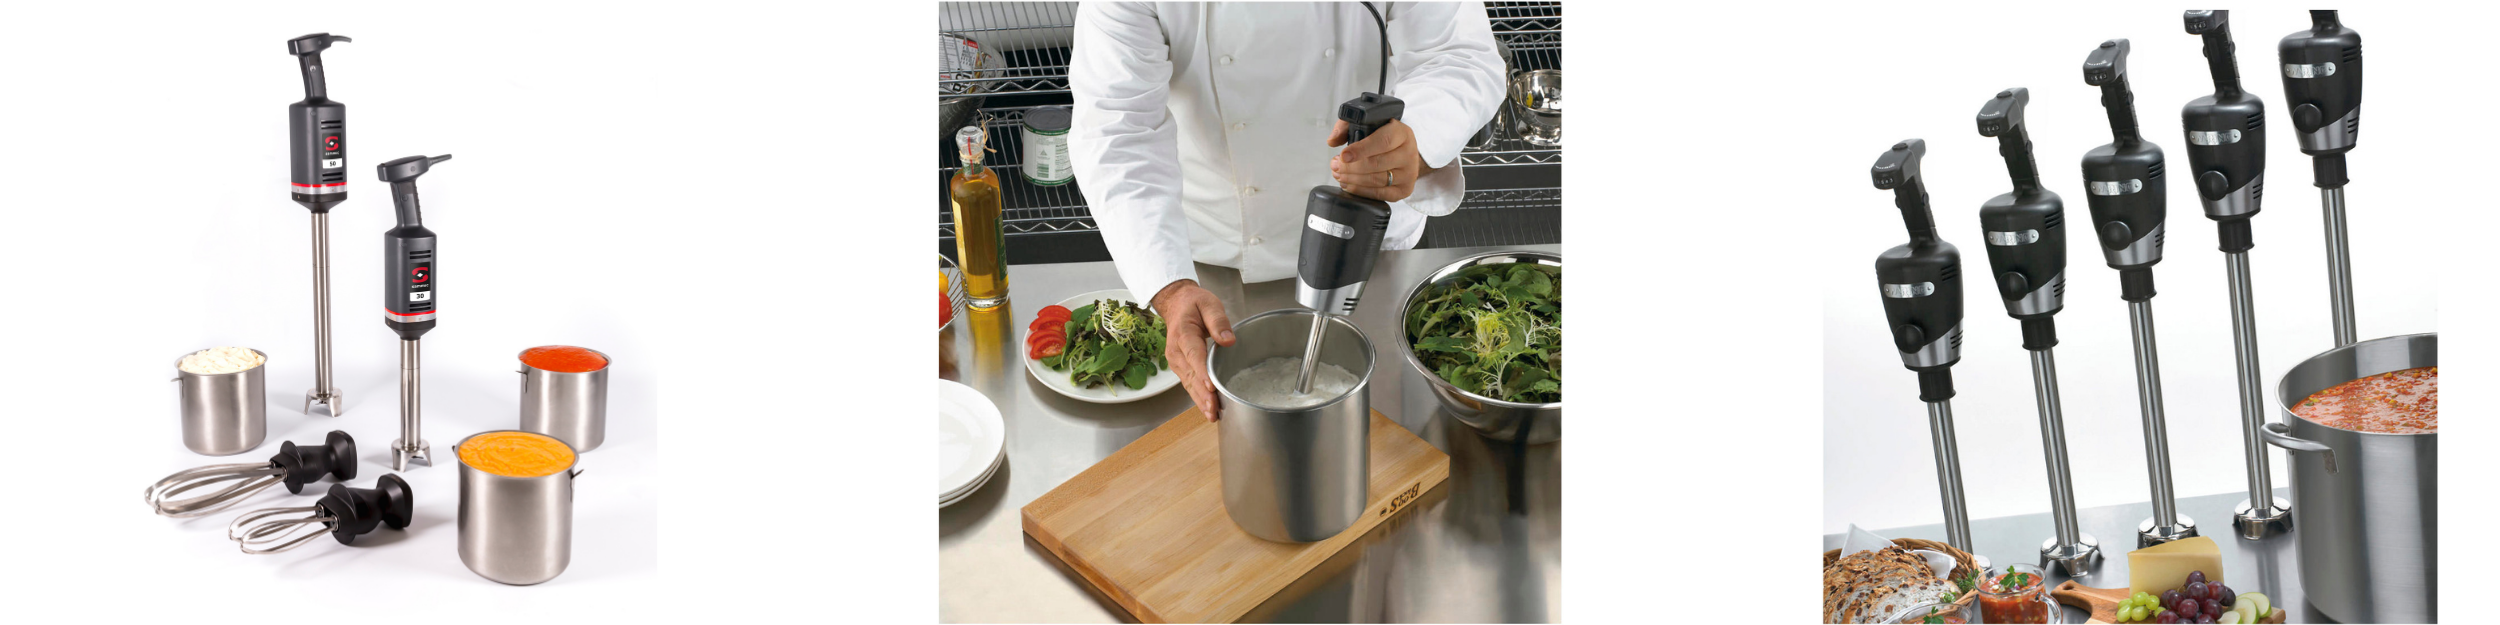 Immersion blender and attachments